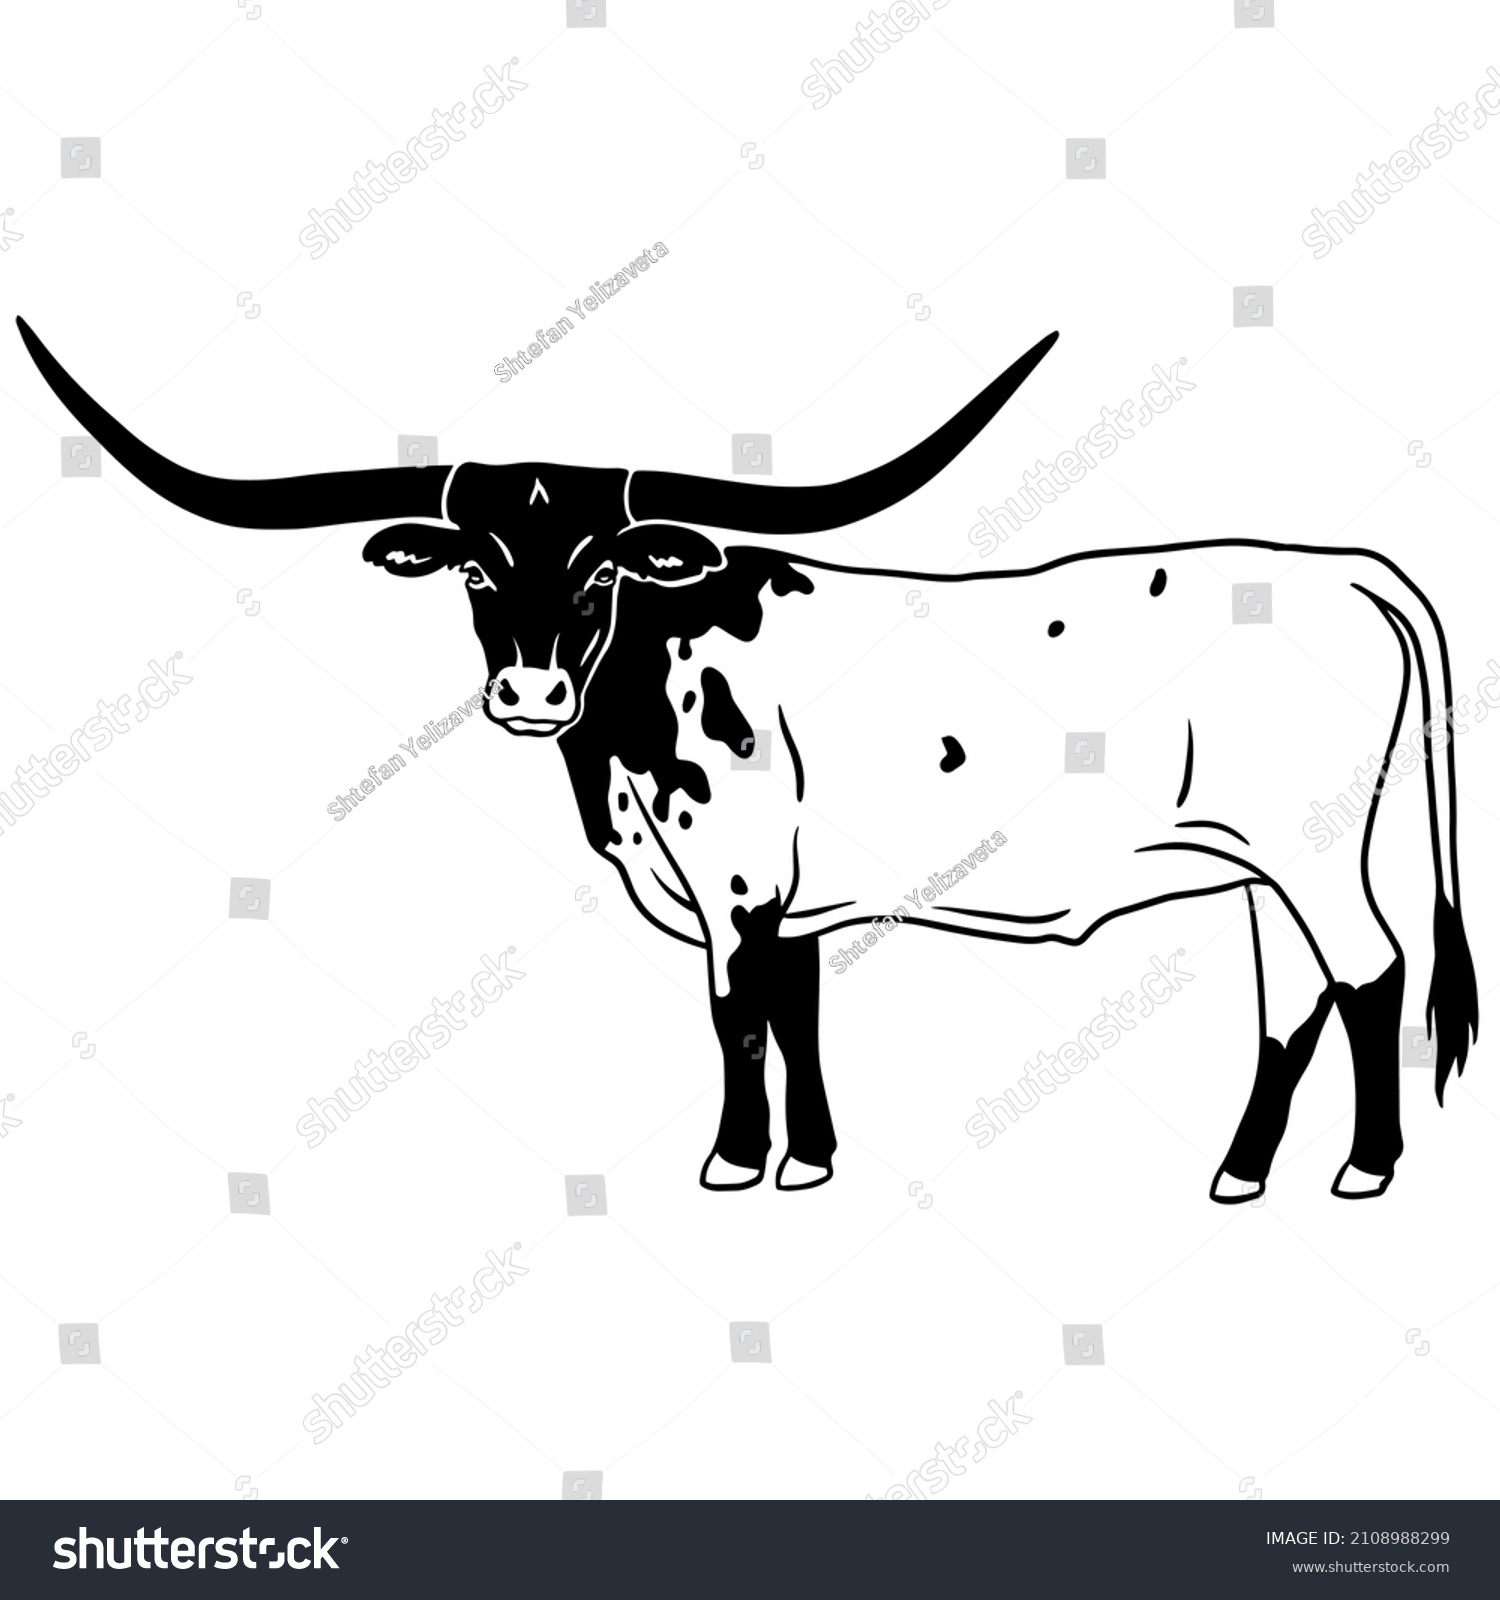 SVG of Texas longhorn vector. Design element for poster, t-shirt print, banner. Texas longhorn cattle head and body icon svg